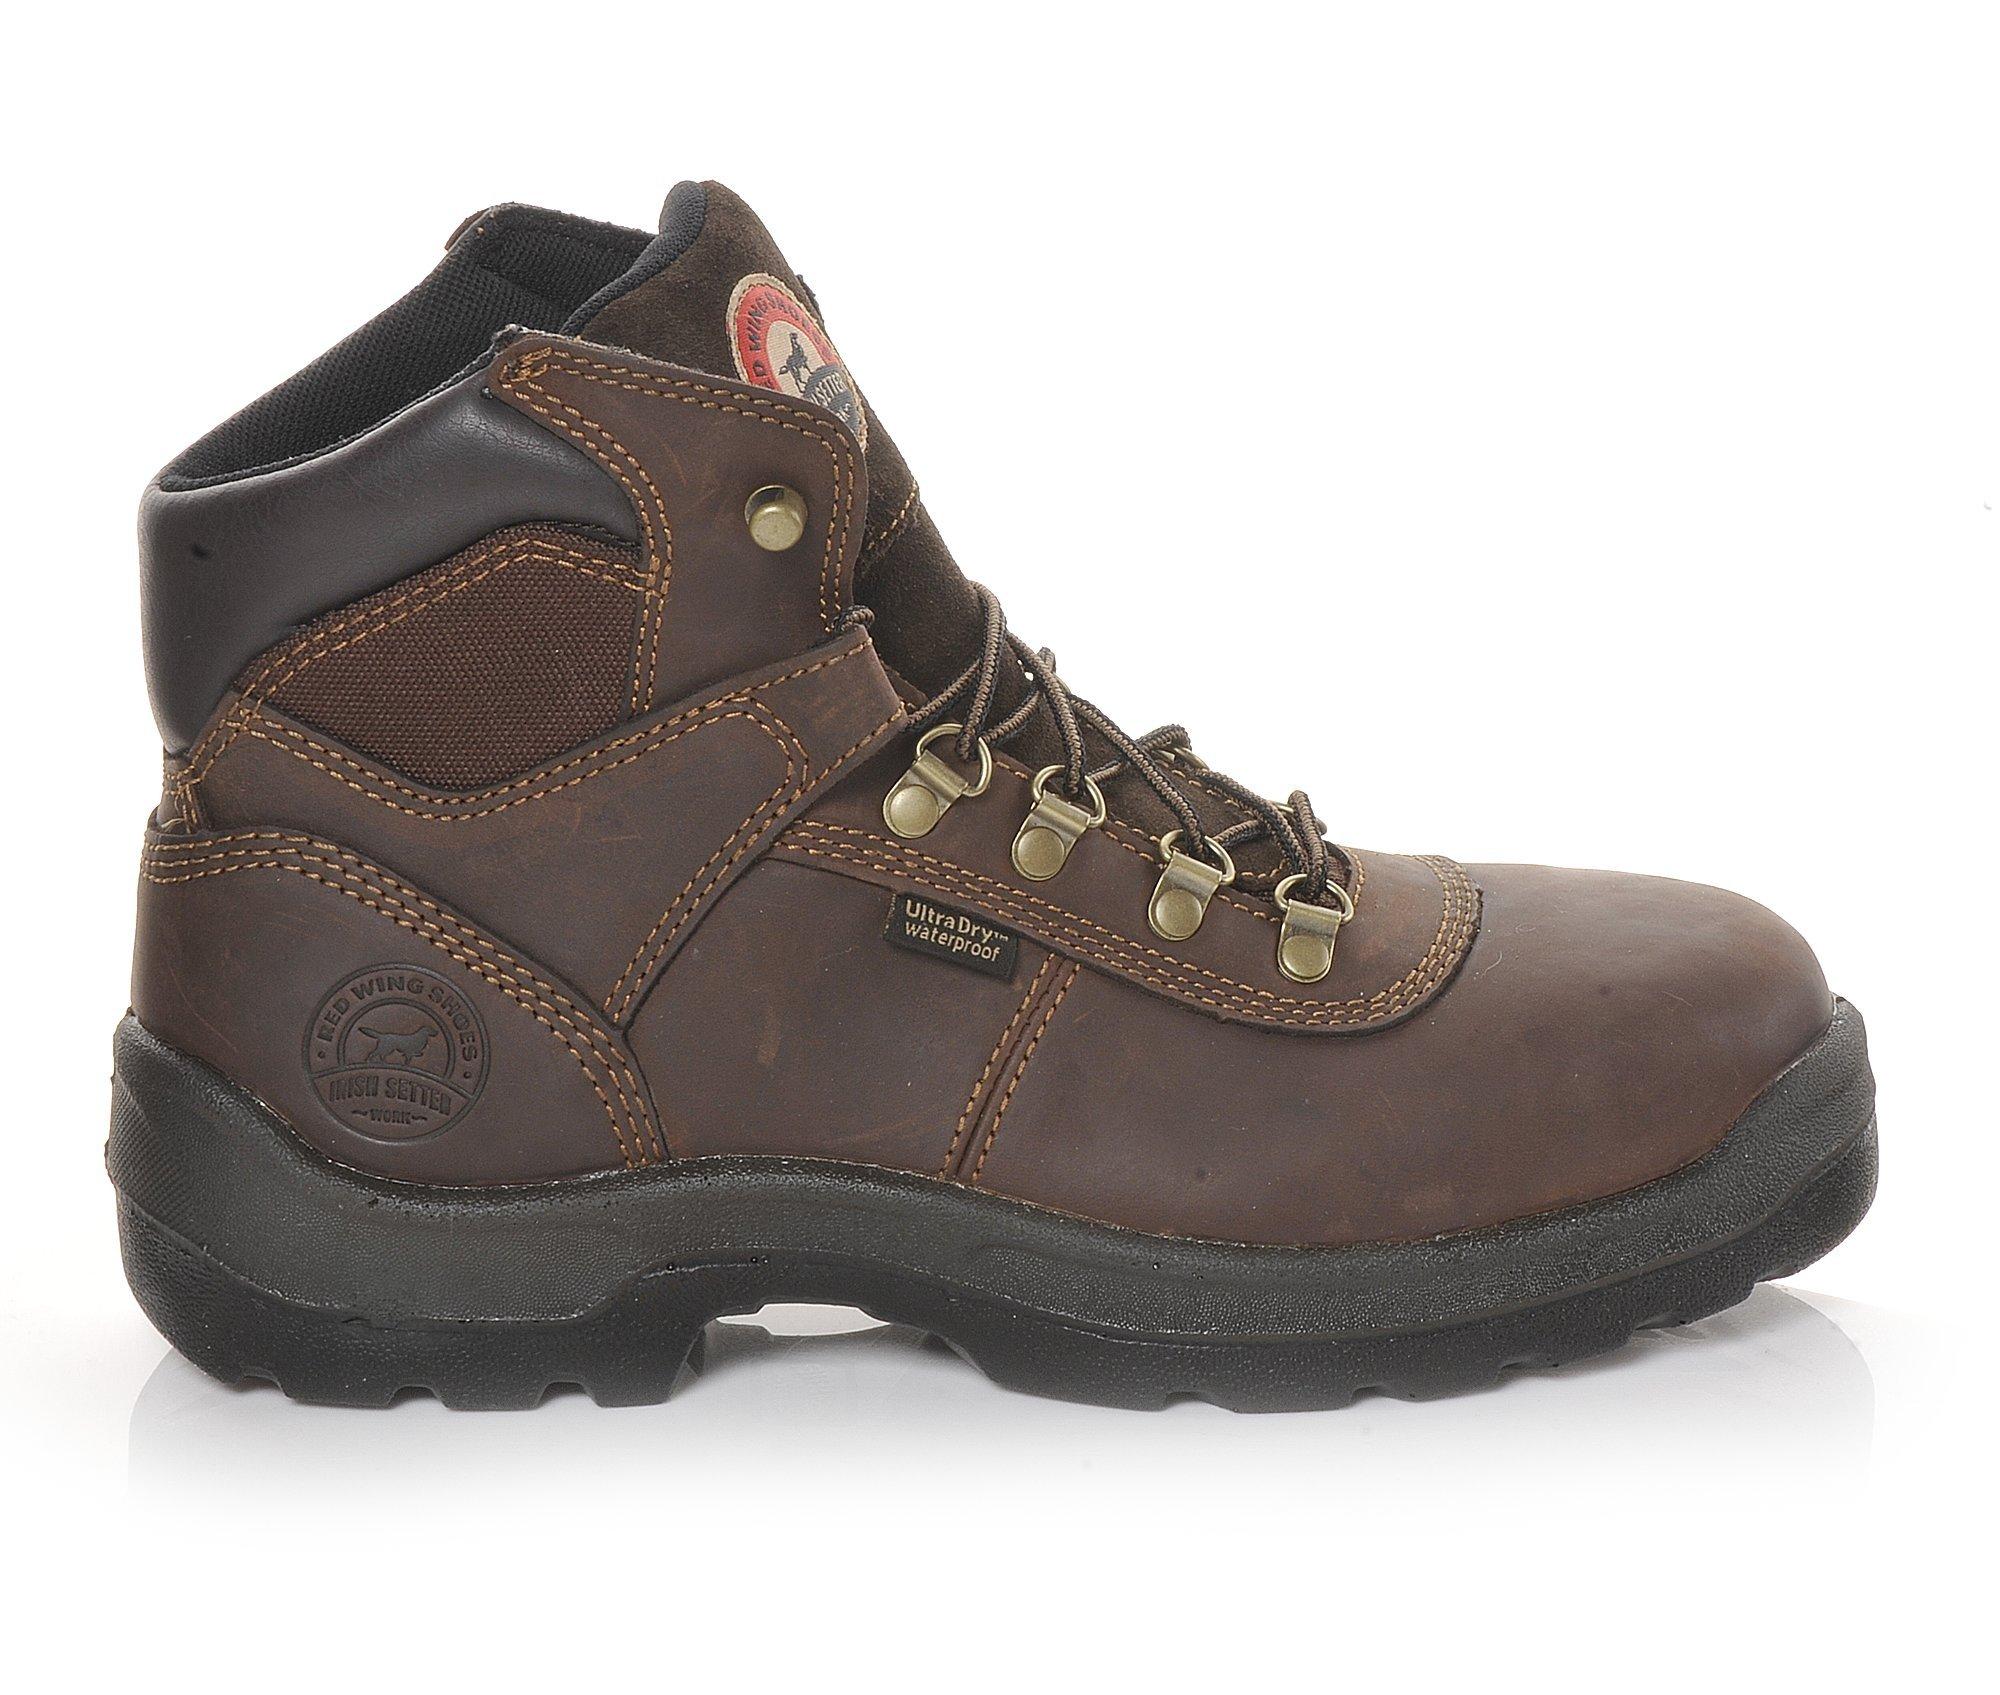 Men's Irish Setter by Red Wing 83617 Ely Hiker 6 Inch Electrical Hazard Boots